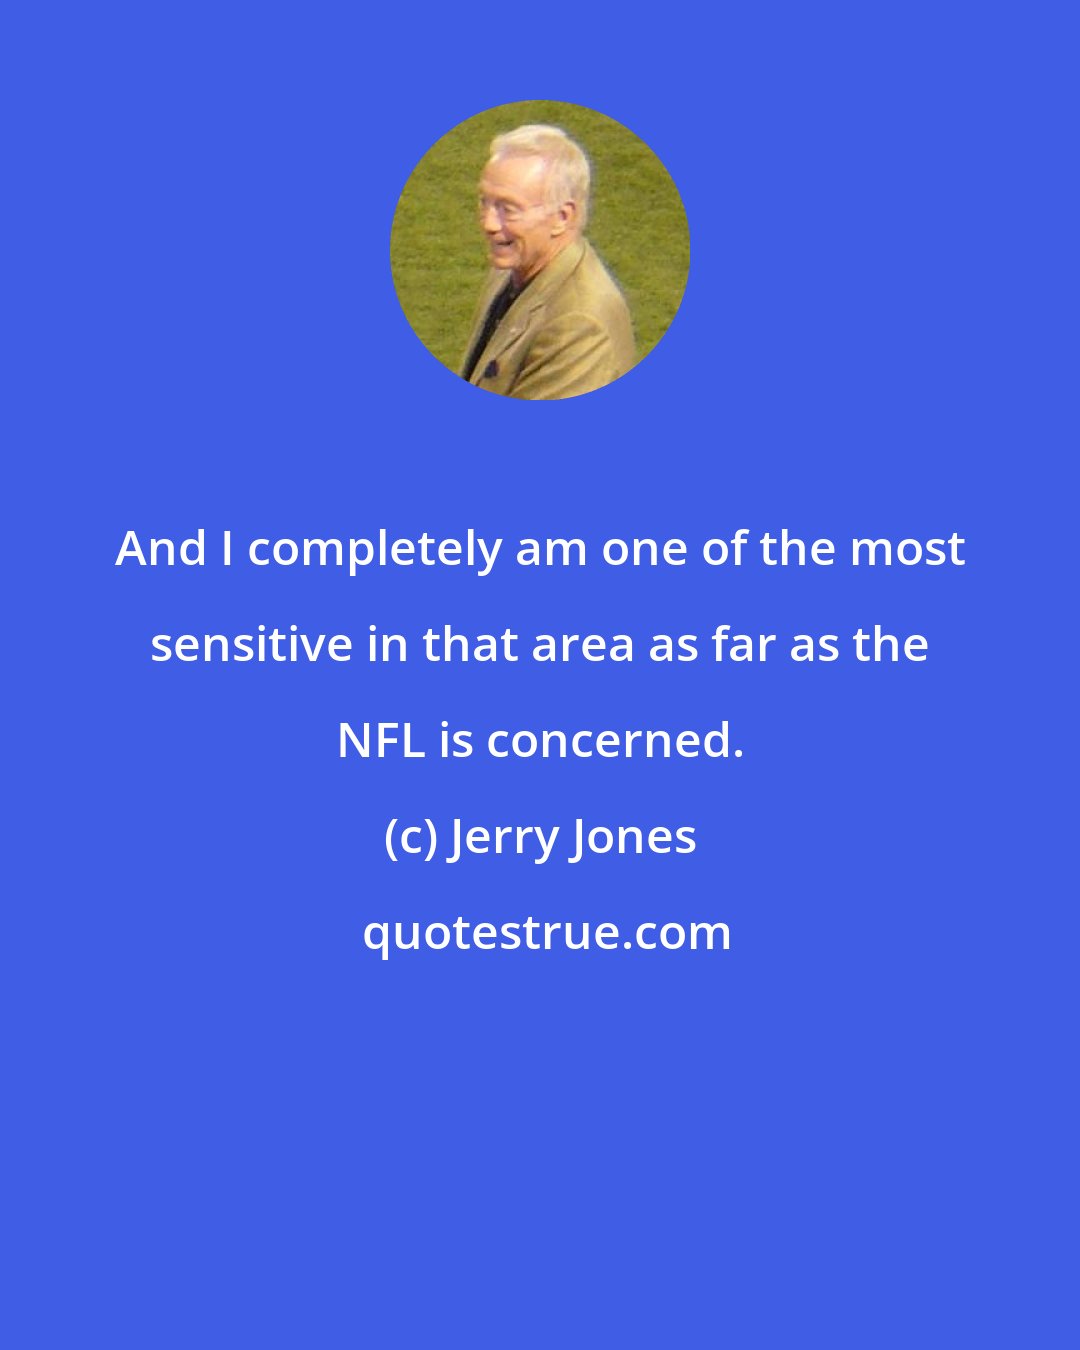 Jerry Jones: And I completely am one of the most sensitive in that area as far as the NFL is concerned.